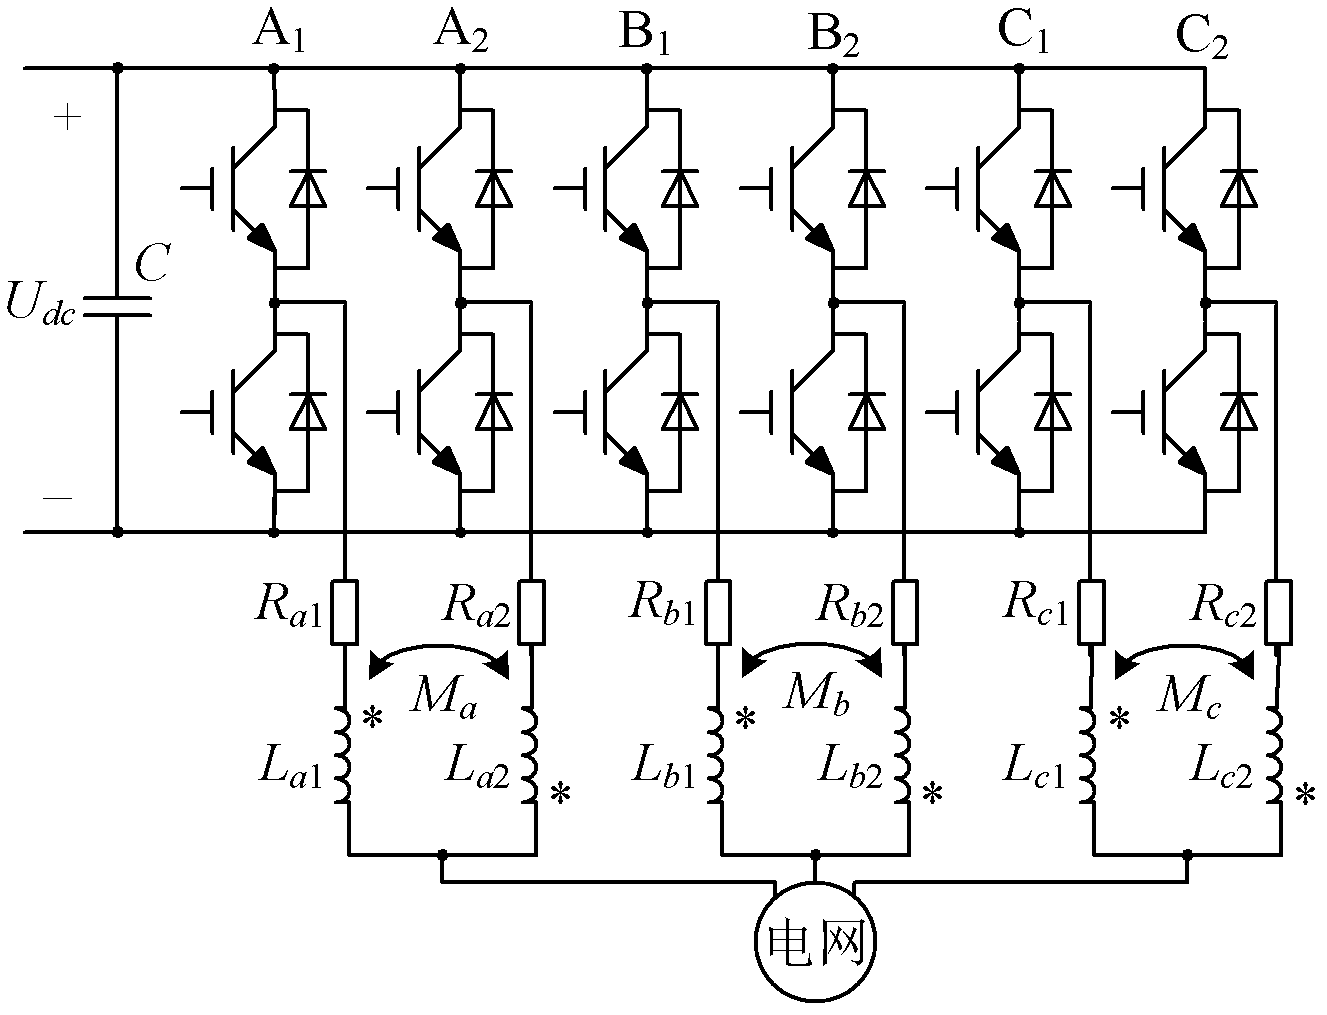 Parallel three-phase grid-connected inverter adopting mutual reactors and control method for three-phase grid-connected inverter